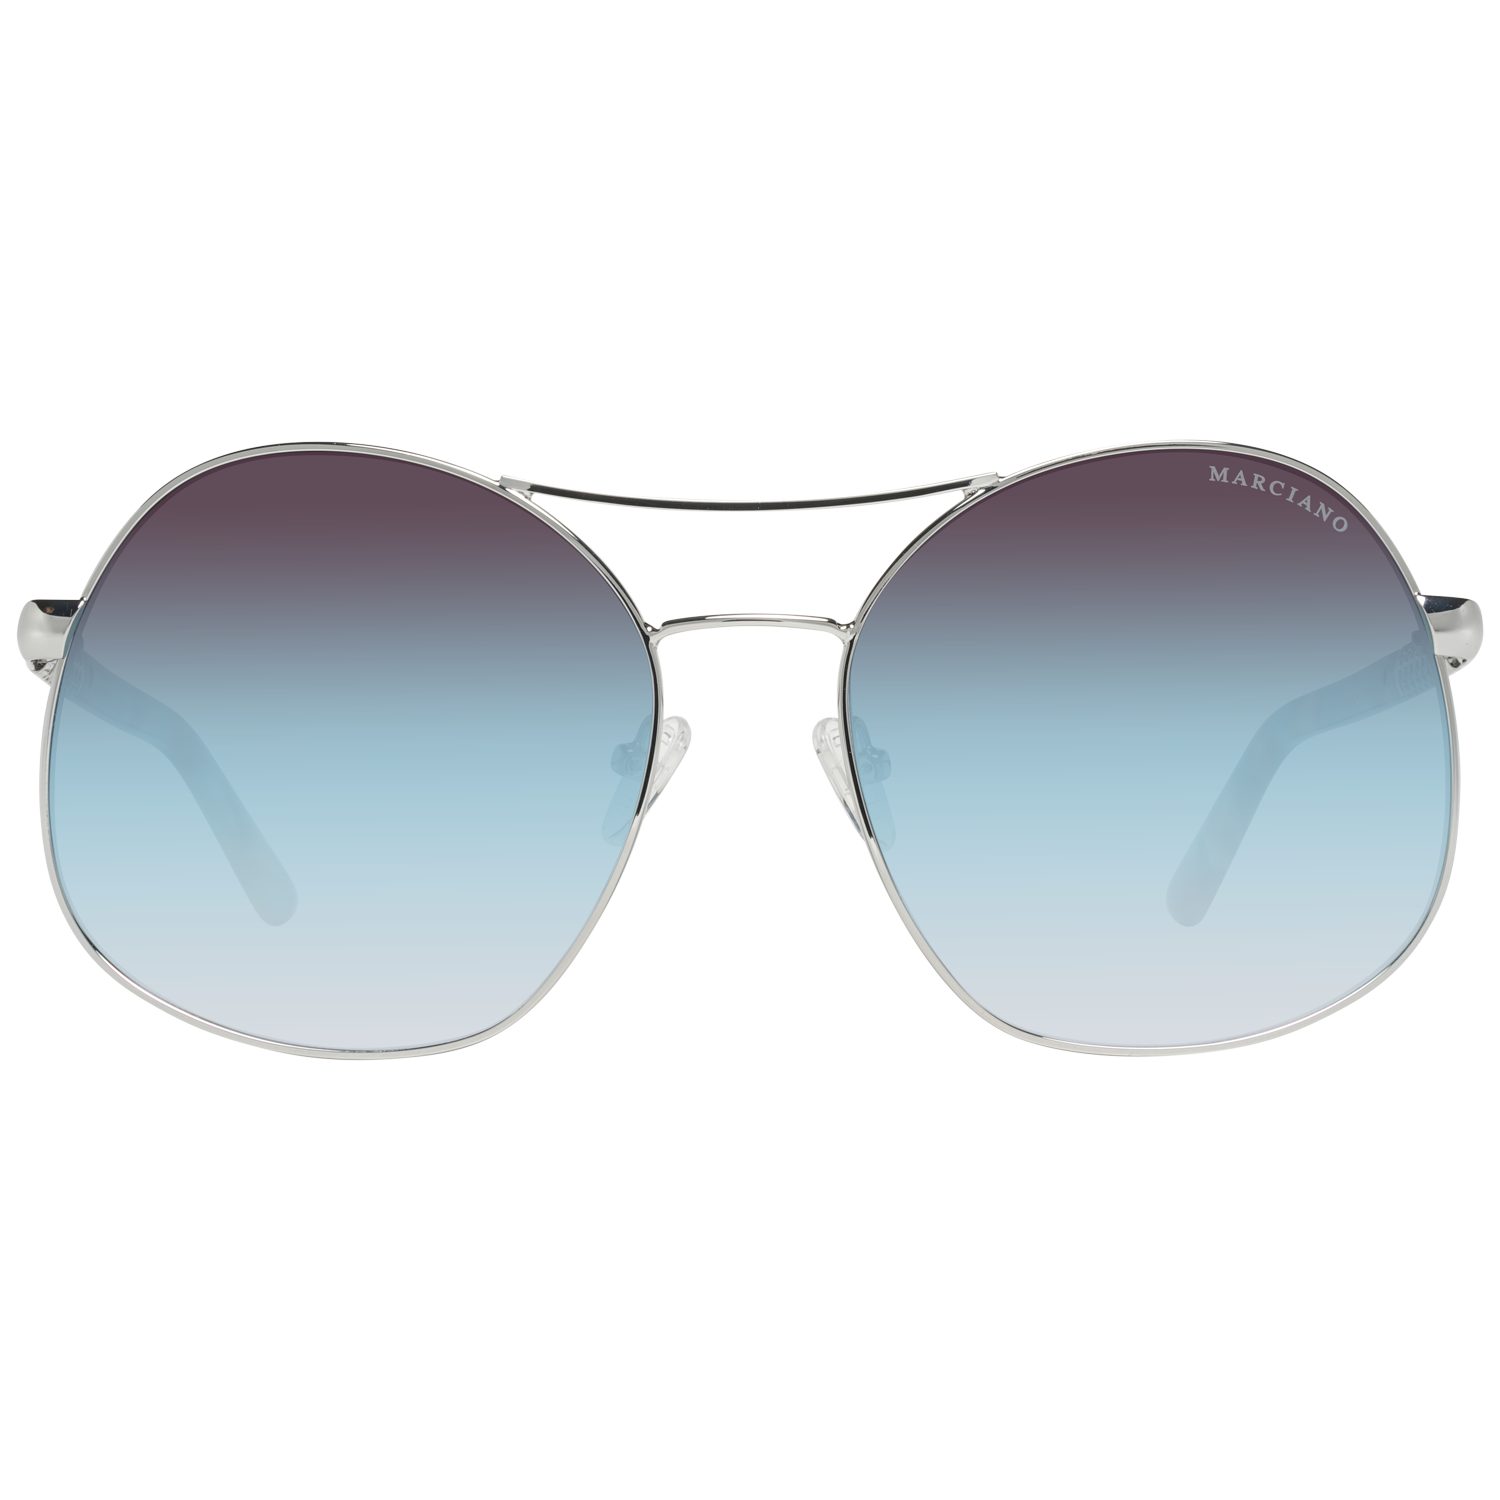 Guess by Marciano Sonnenbrille